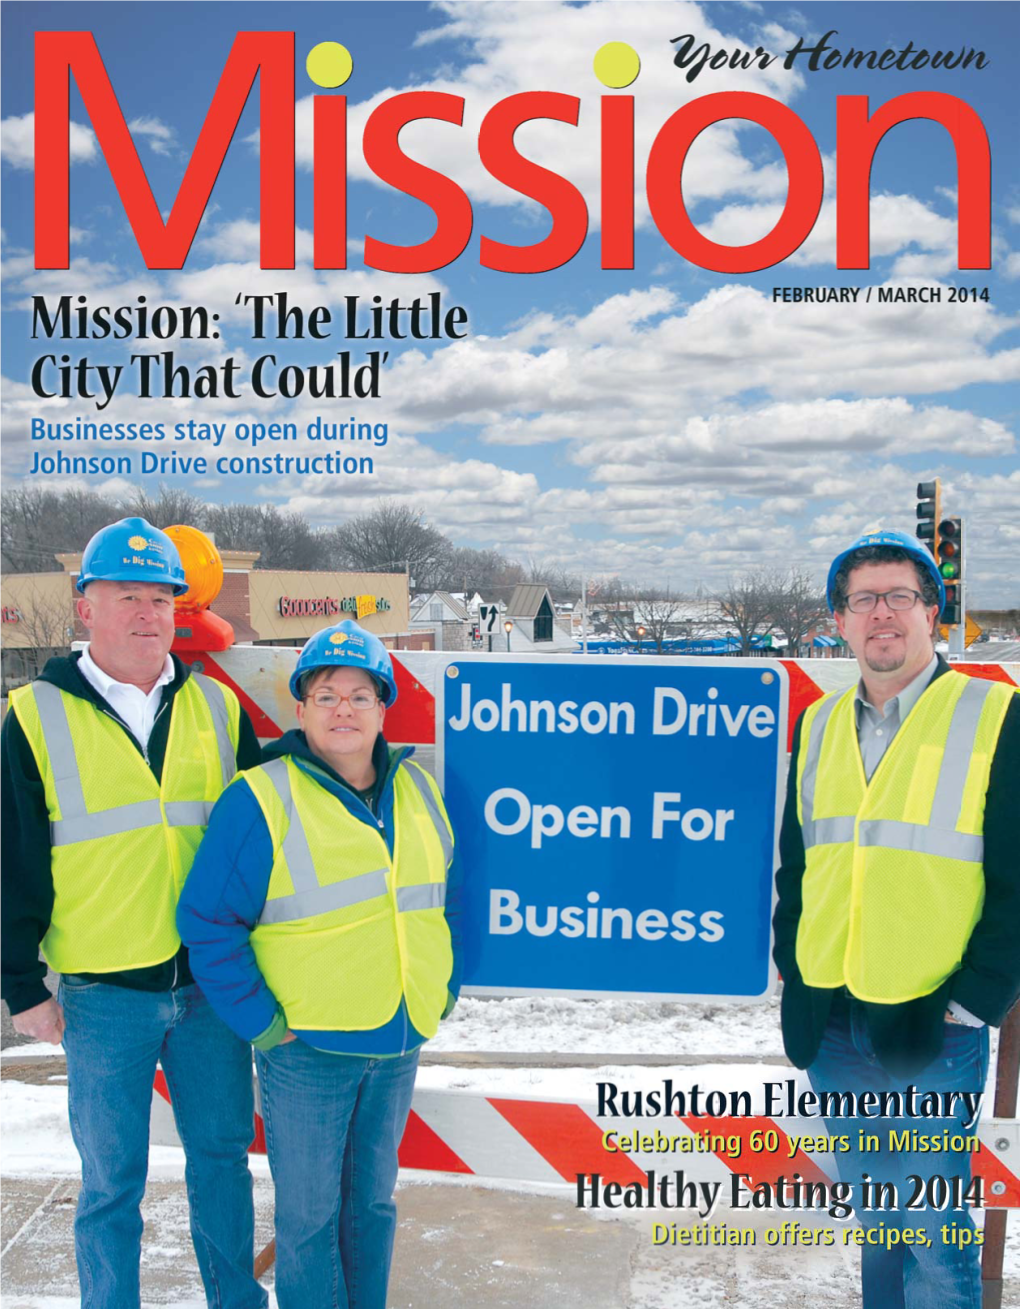 Contents Getting Older but Staying Youthful 6 Mission Businesses Are Open and Operating During Johnson Drive Five Years Ago, Our Former City About the Magazine